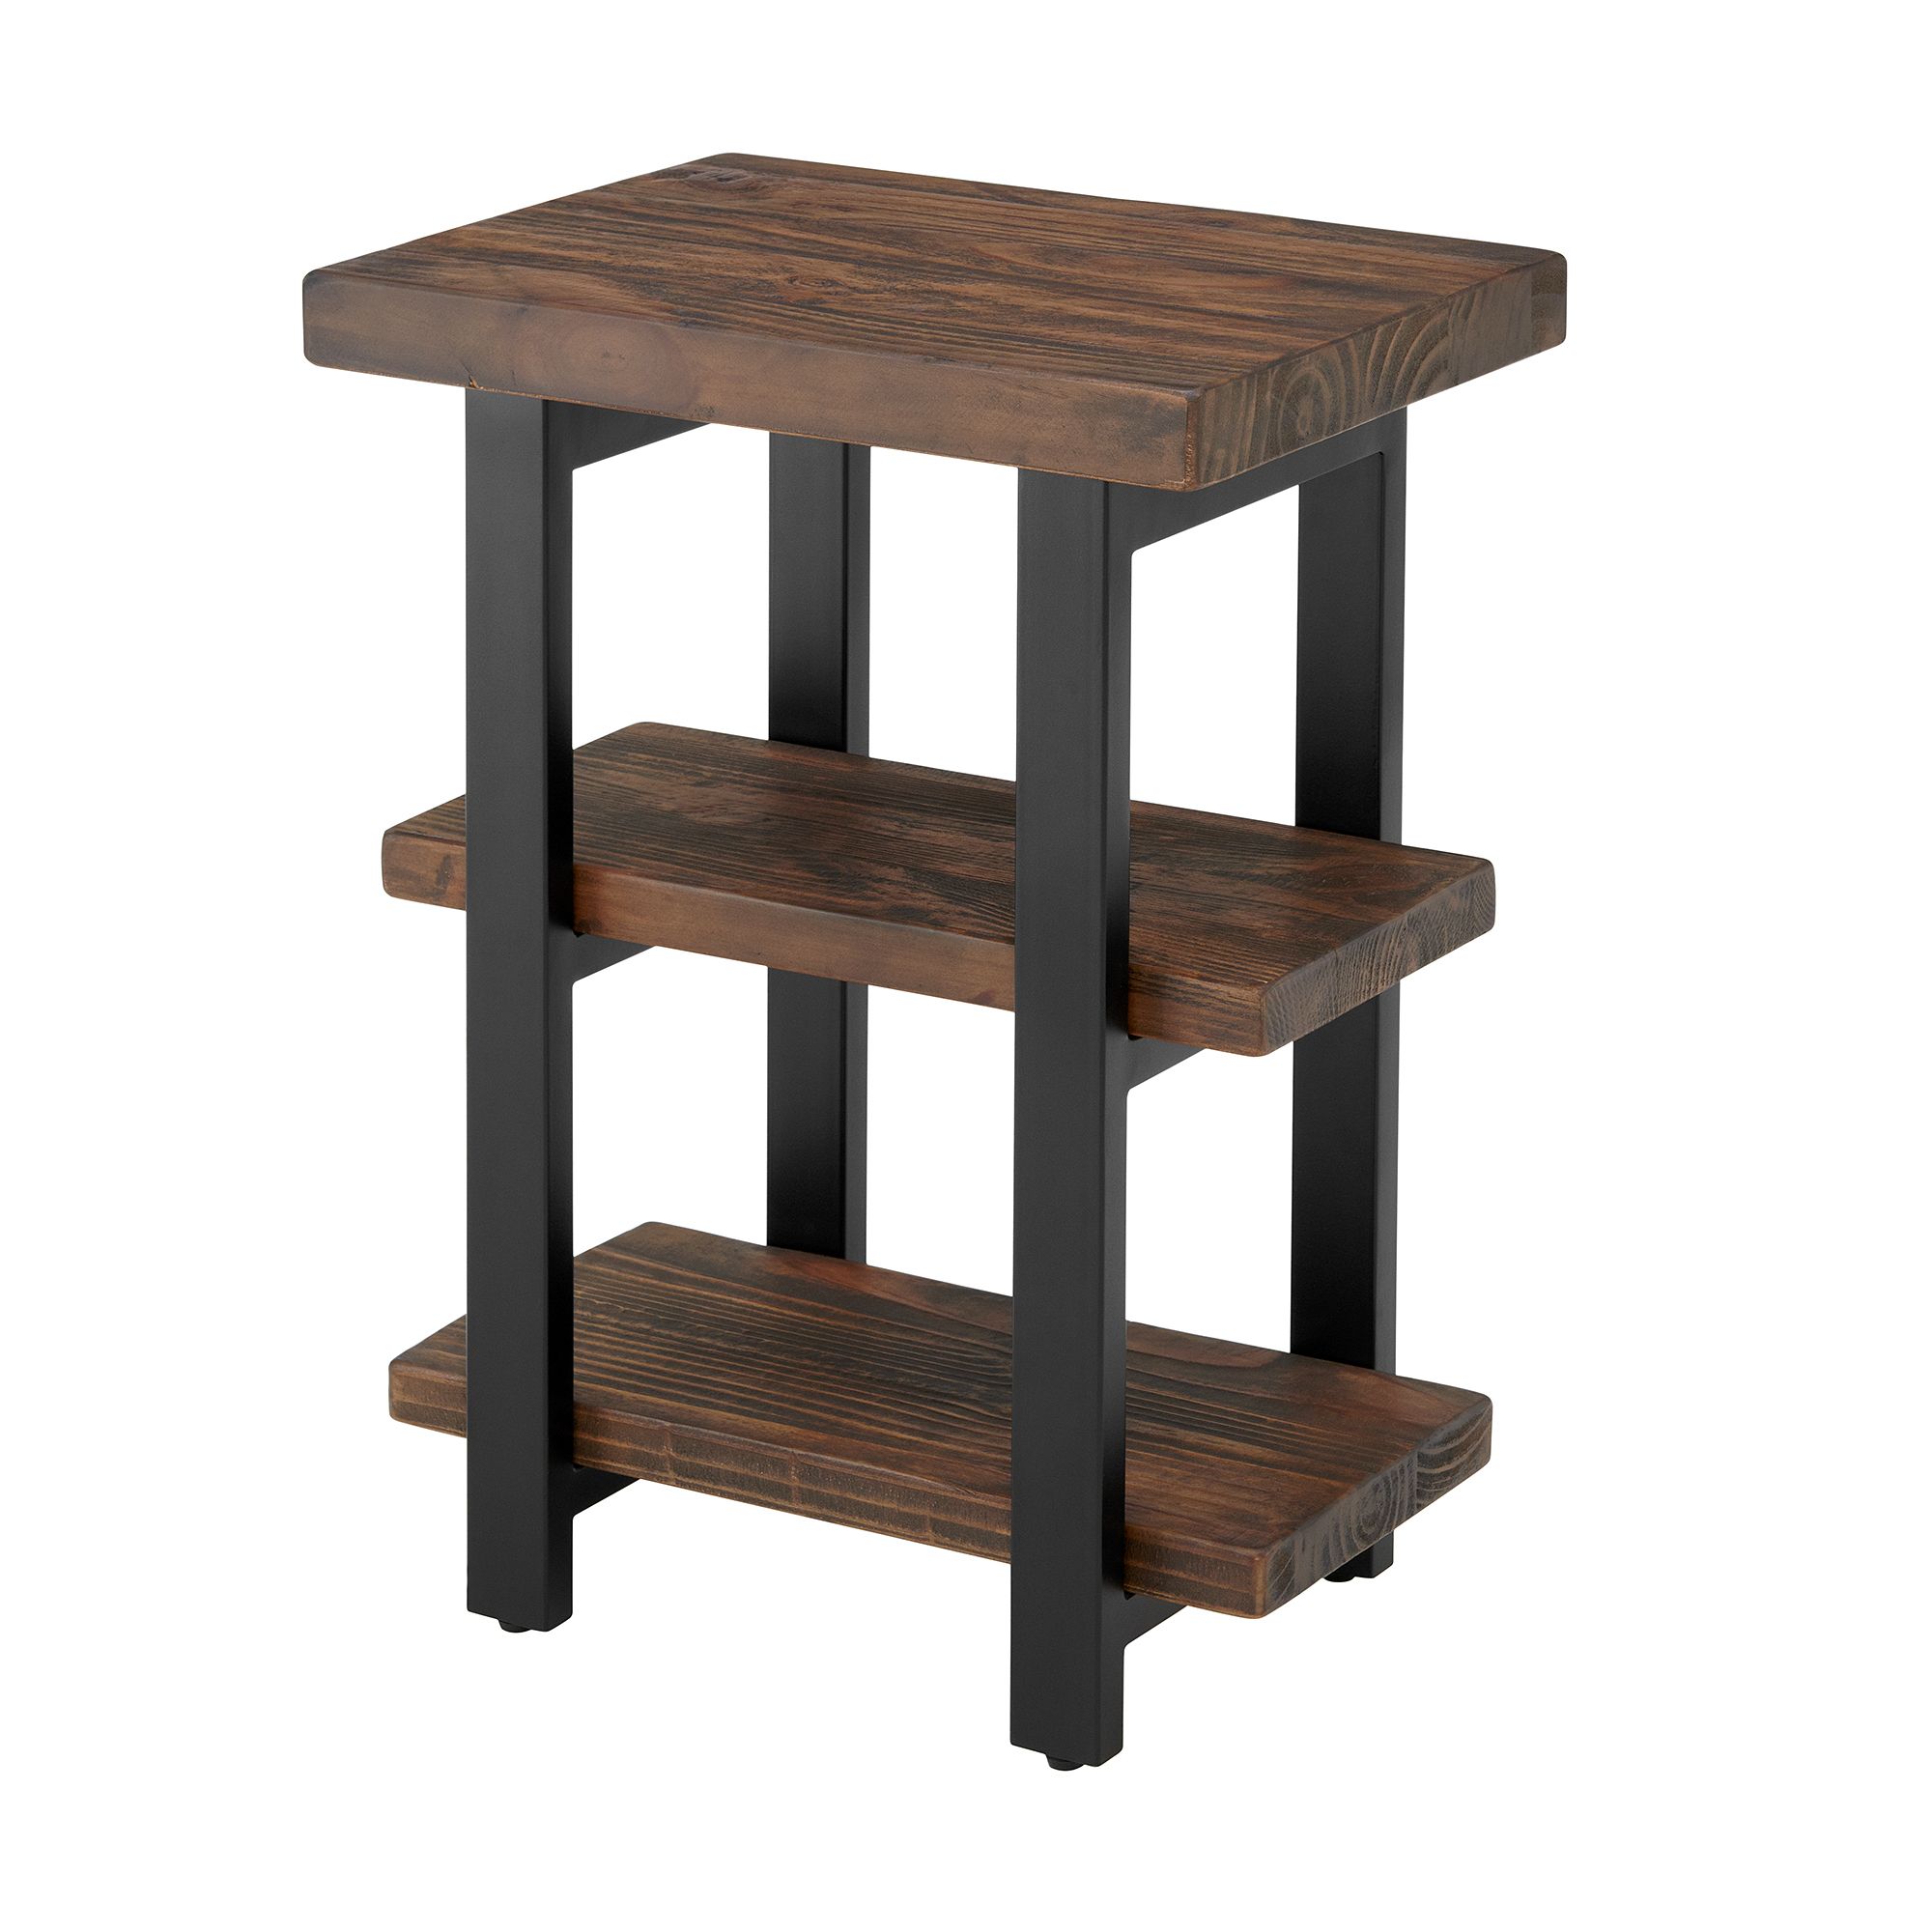 Alaterre Pomona Rustic 2 Shelf End Table – Natural – End Regarding 2 Shelf Console Tables (View 15 of 20)